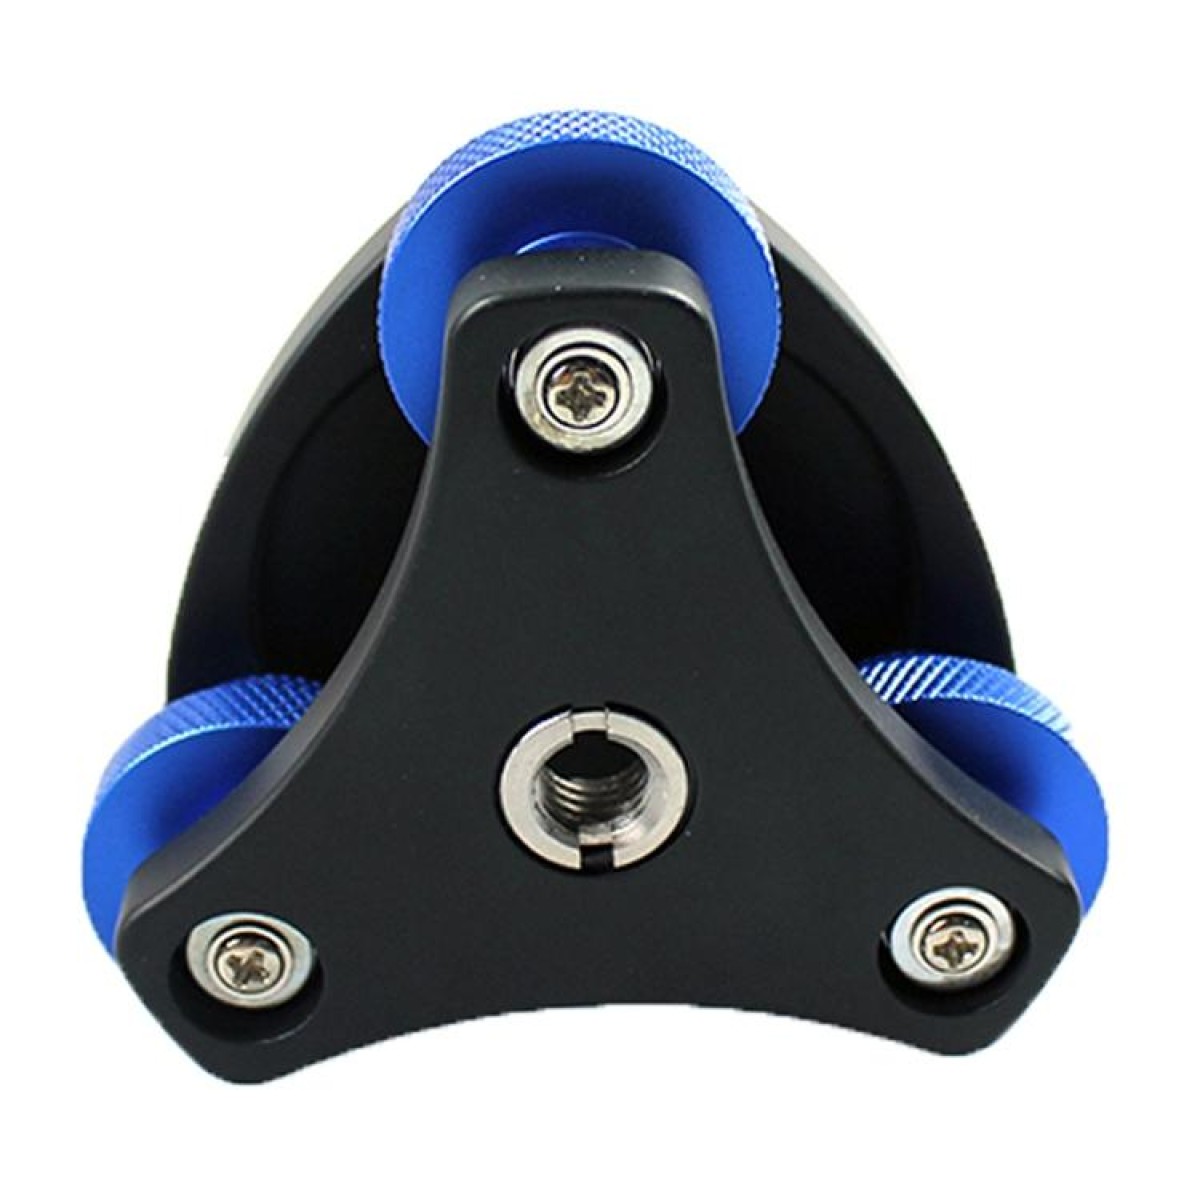 DLEV-3838 Precision Bubble Level Leveling Base Tripod Head Plate with 3/8 inch Screw & 3 Adjustment Dials for Tripod Mount